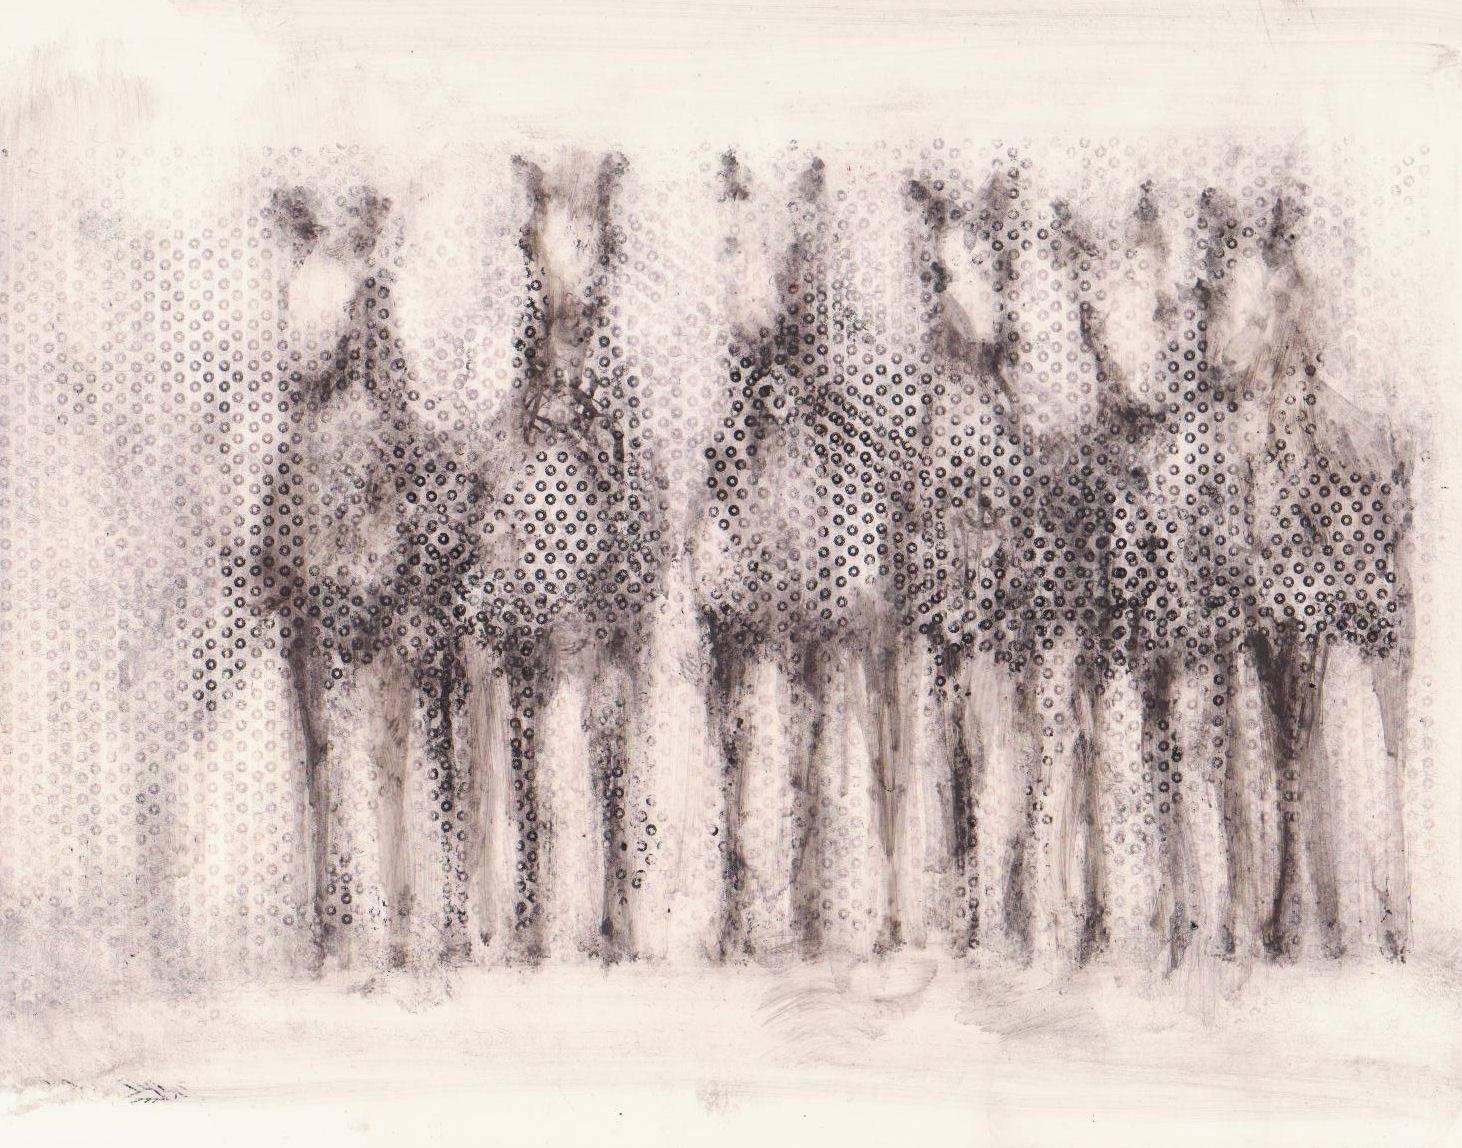 Alicia Rothman Animal Painting - 6 Dot Horses, oil on wood, mixed media, 8 x 10 inches. Painting of horses